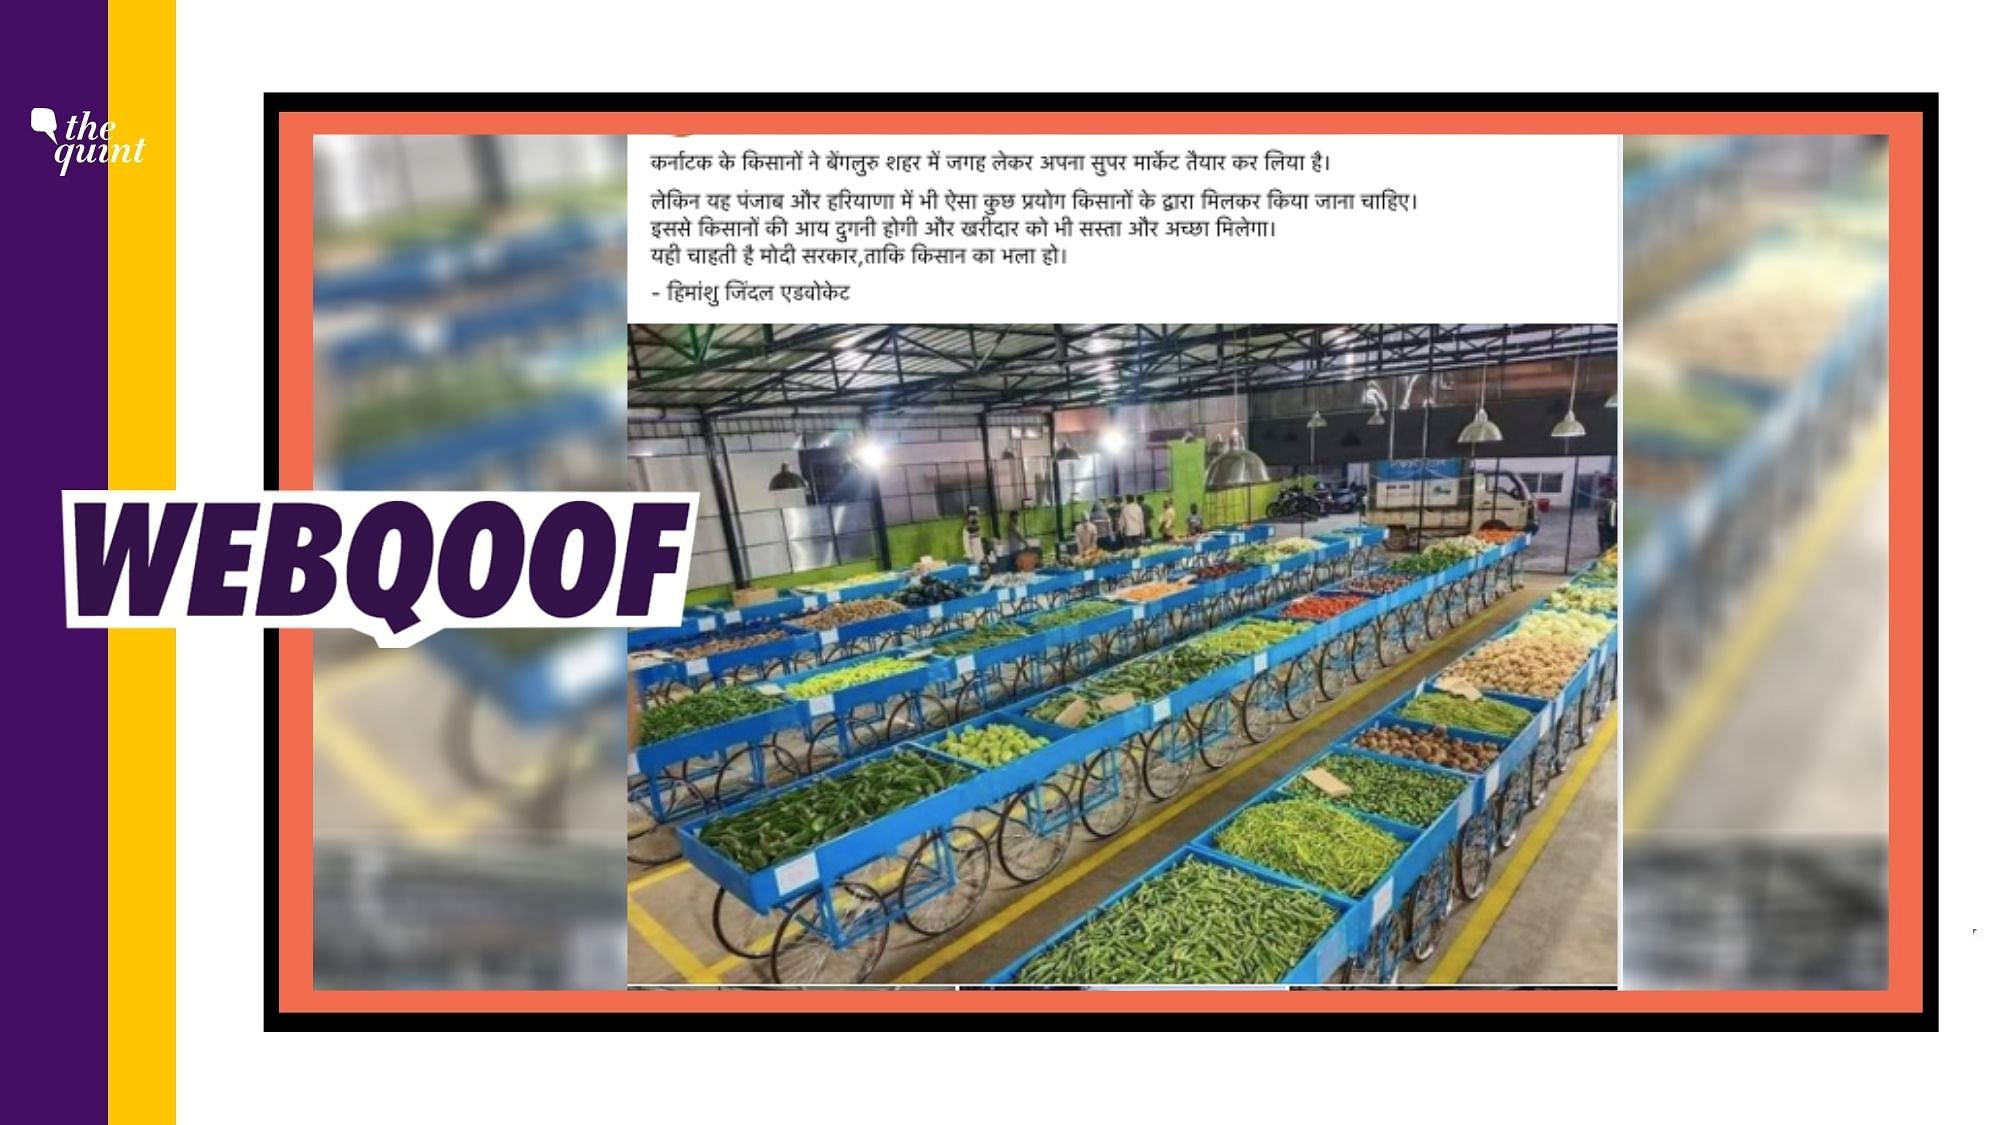 A set of images is beings shared on the internet with a claim that they show a supermarket set-up by farmers in Bengaluru